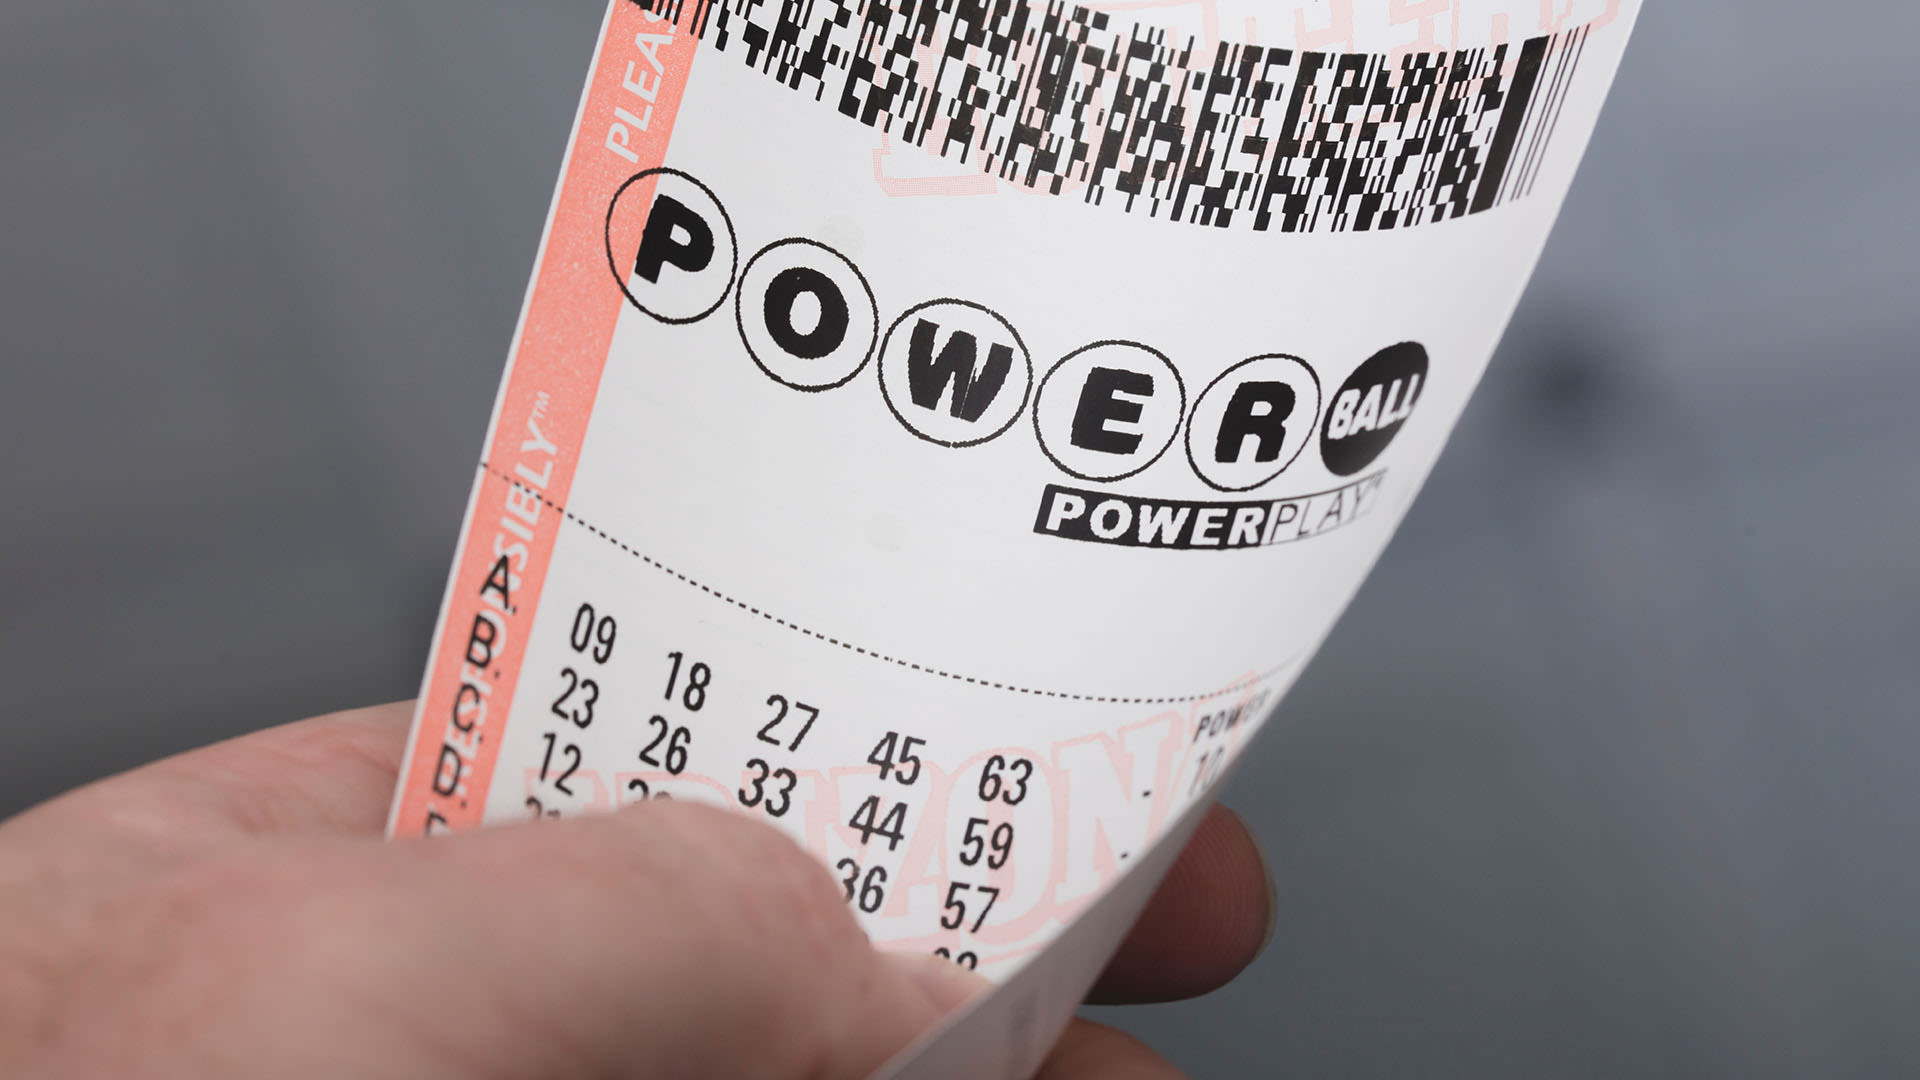 Warning to check Powerball tickets as $50,000 prize remains unclaimed